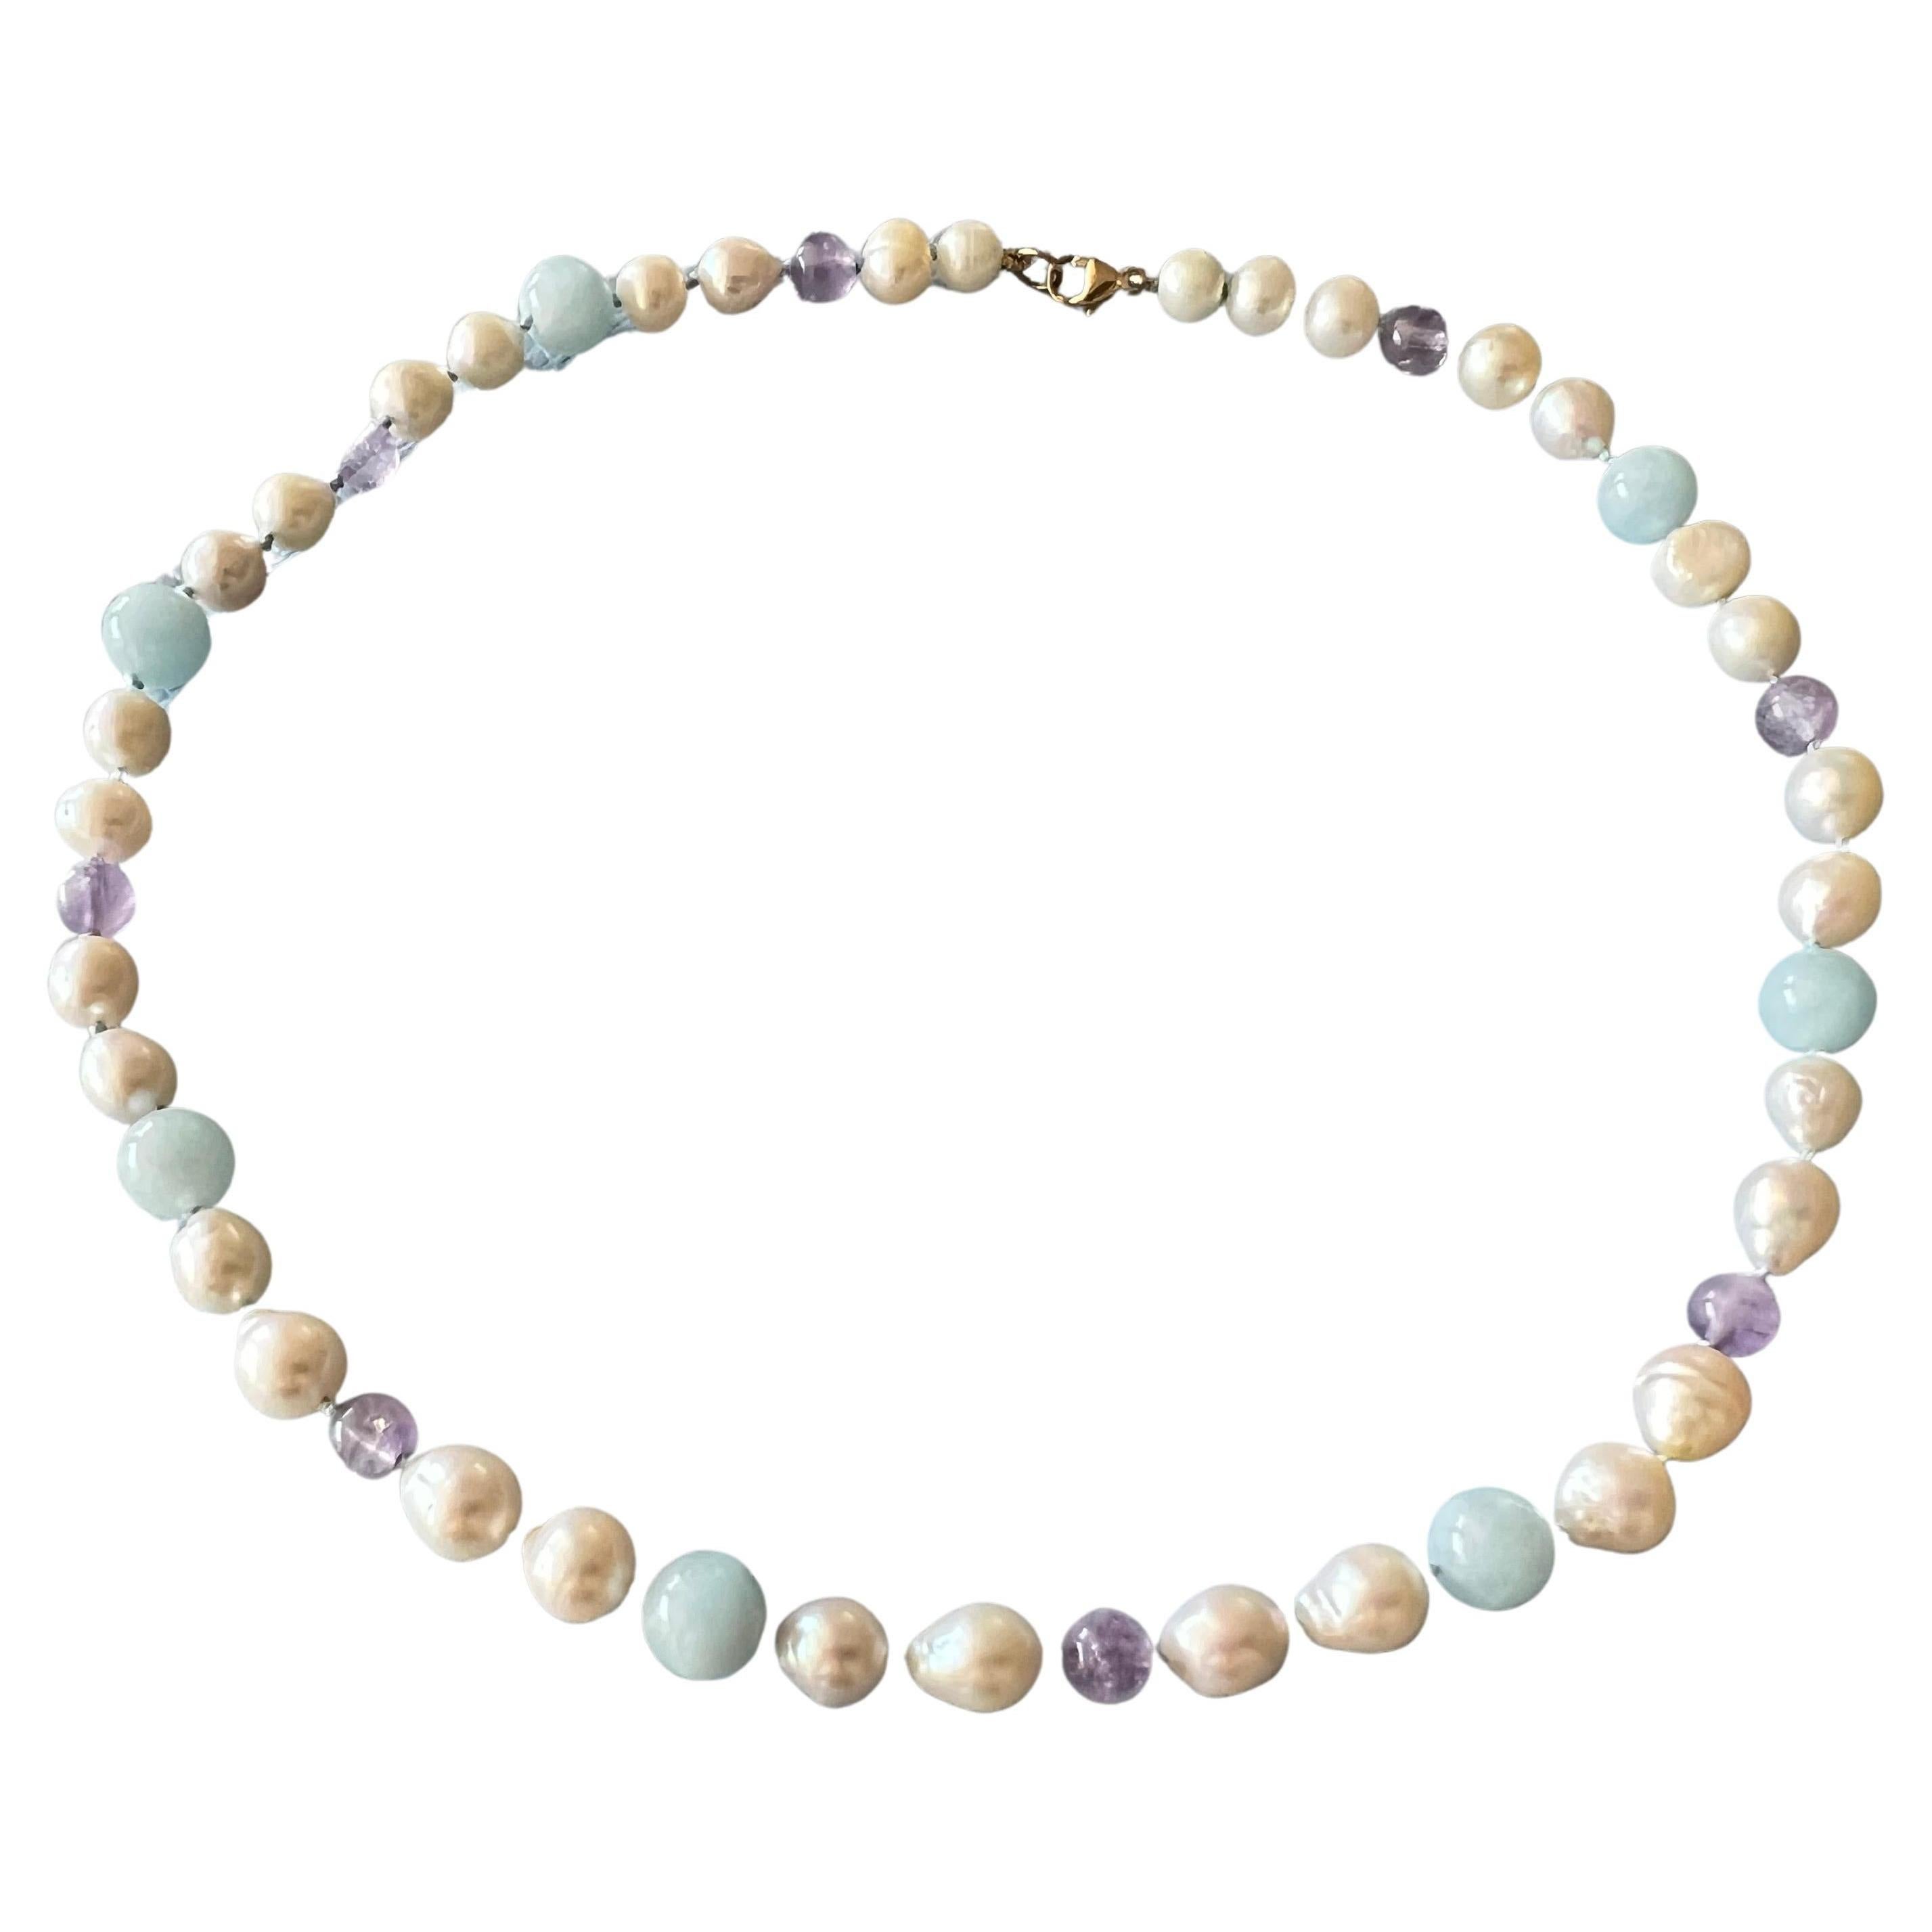 Aquamarine Amethyst Pearl Choker Bead Necklace Gold Filled J Dauphin For Sale